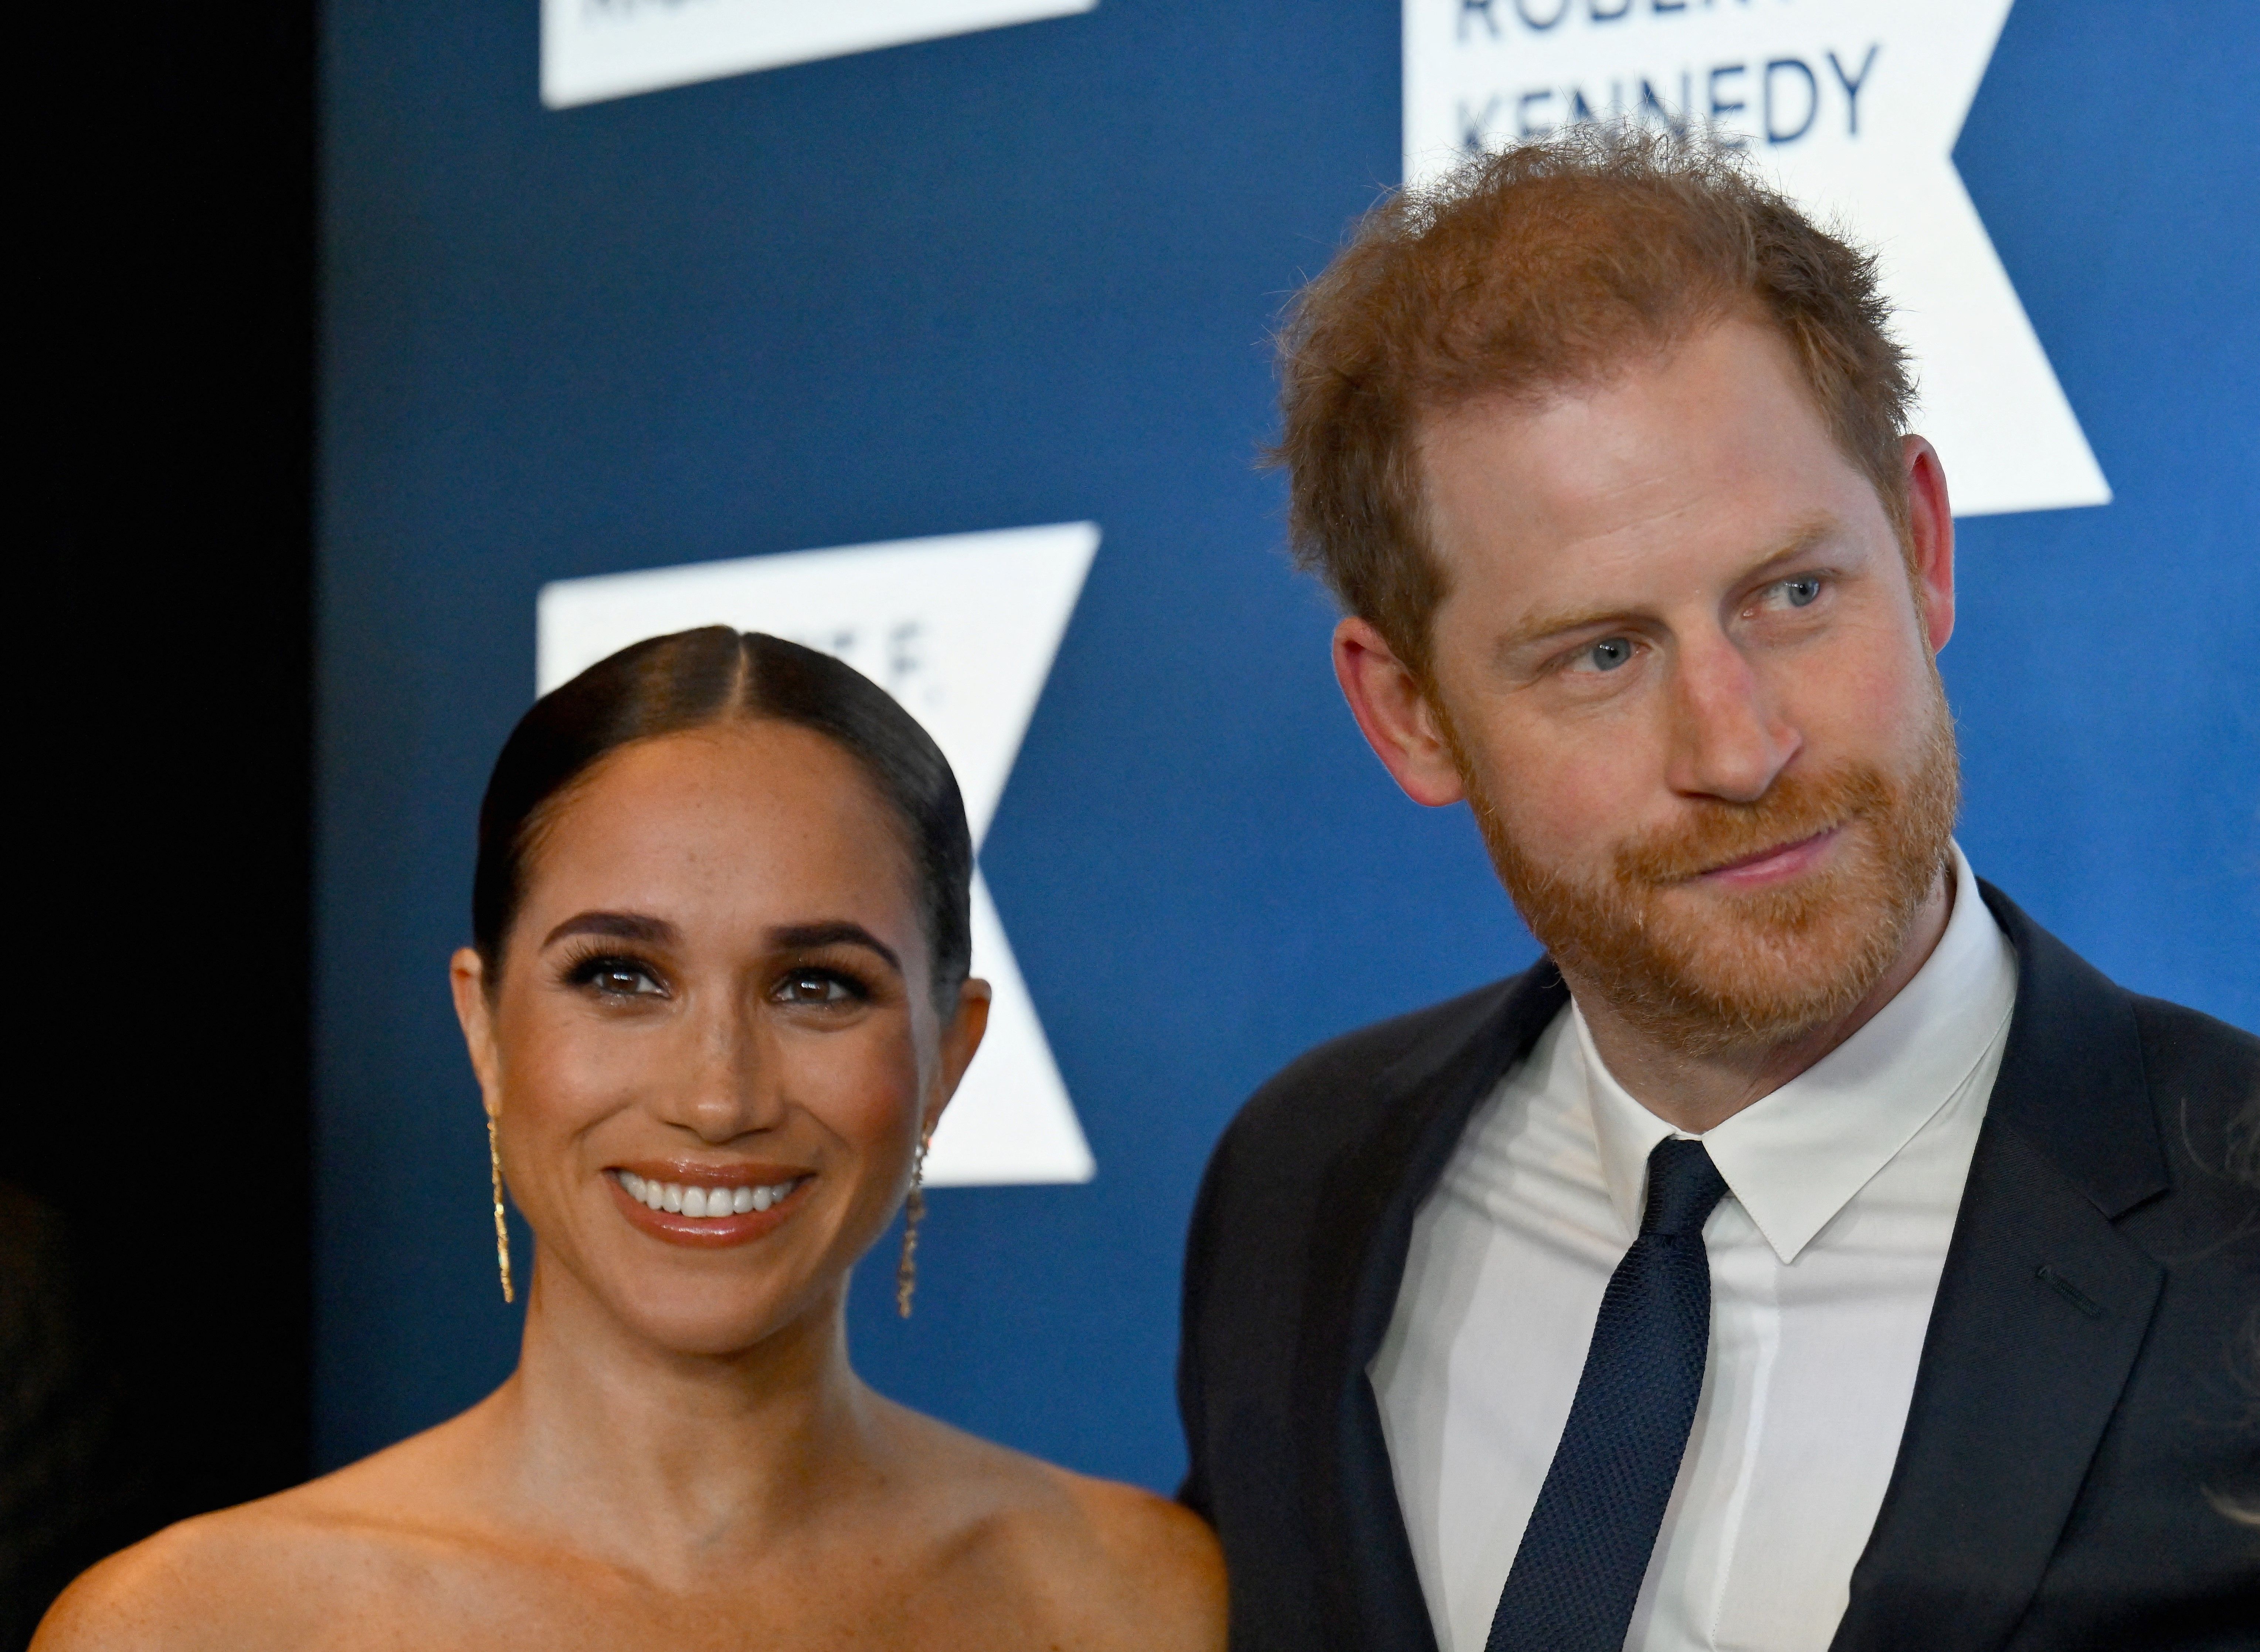 Prince Harry and Meghan Markle in New York in 2022 | Source: Getty Images